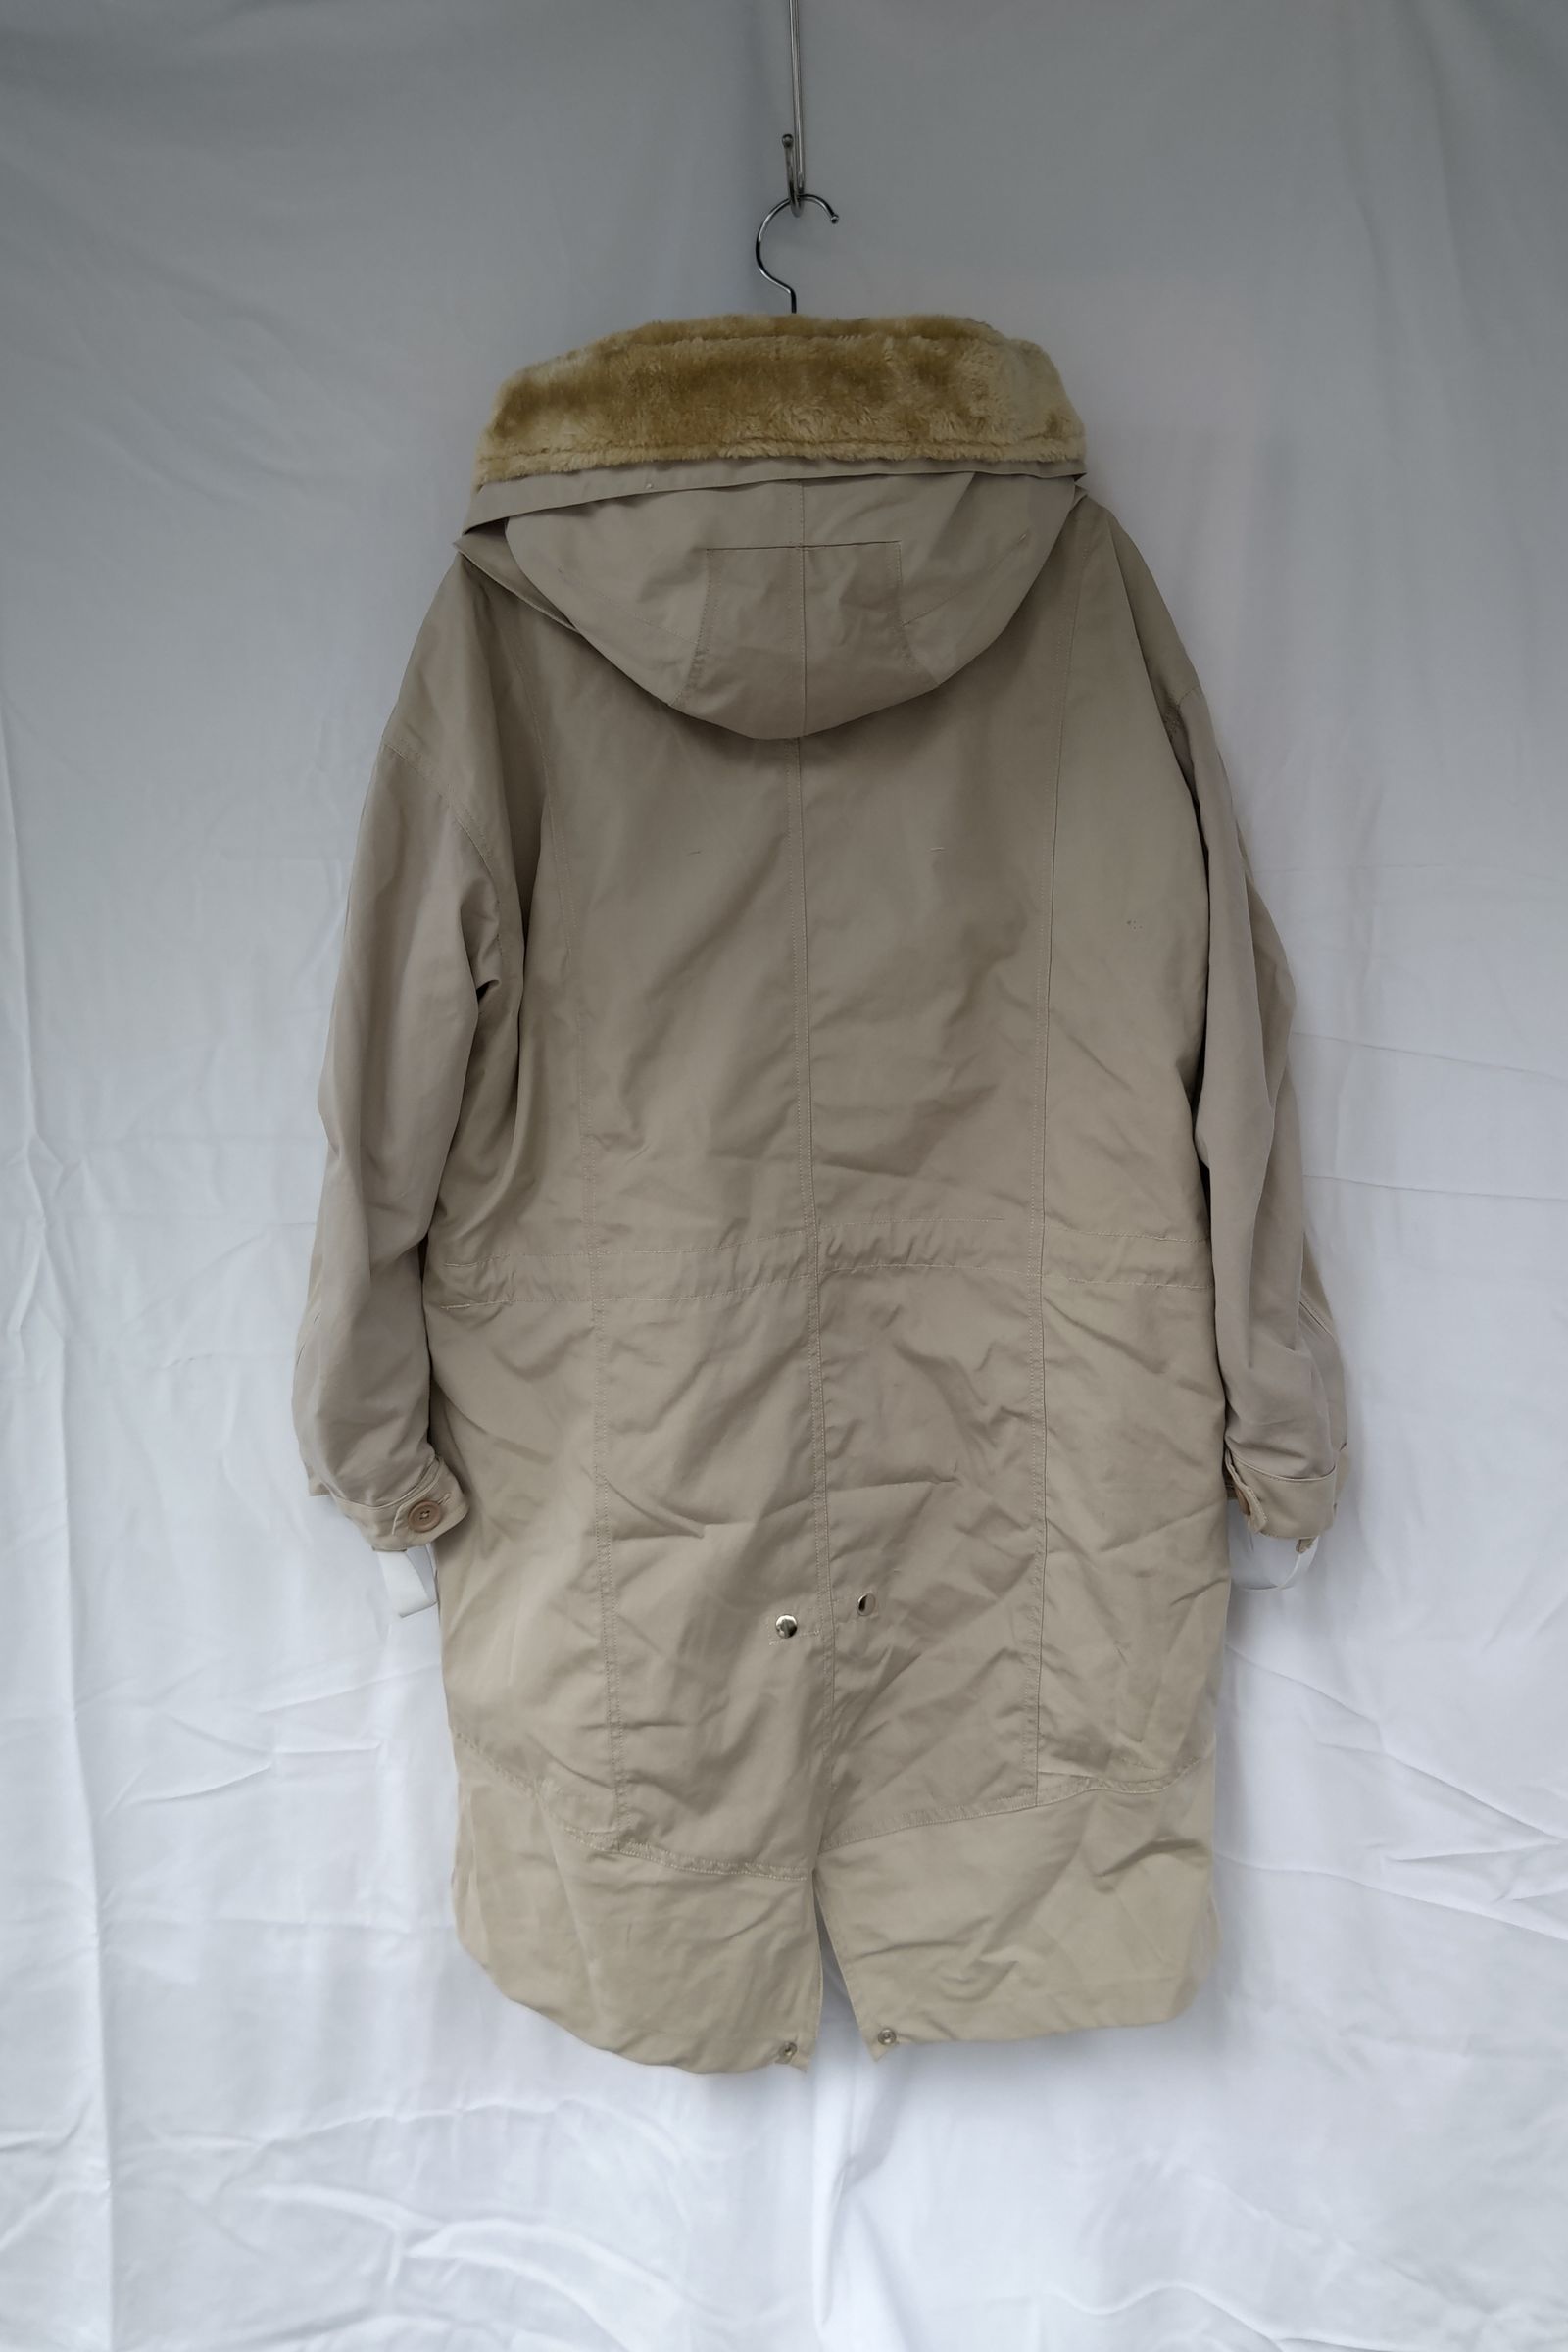 SEEALL - reconstructed trench parka-beige mix-22aw | asterisk